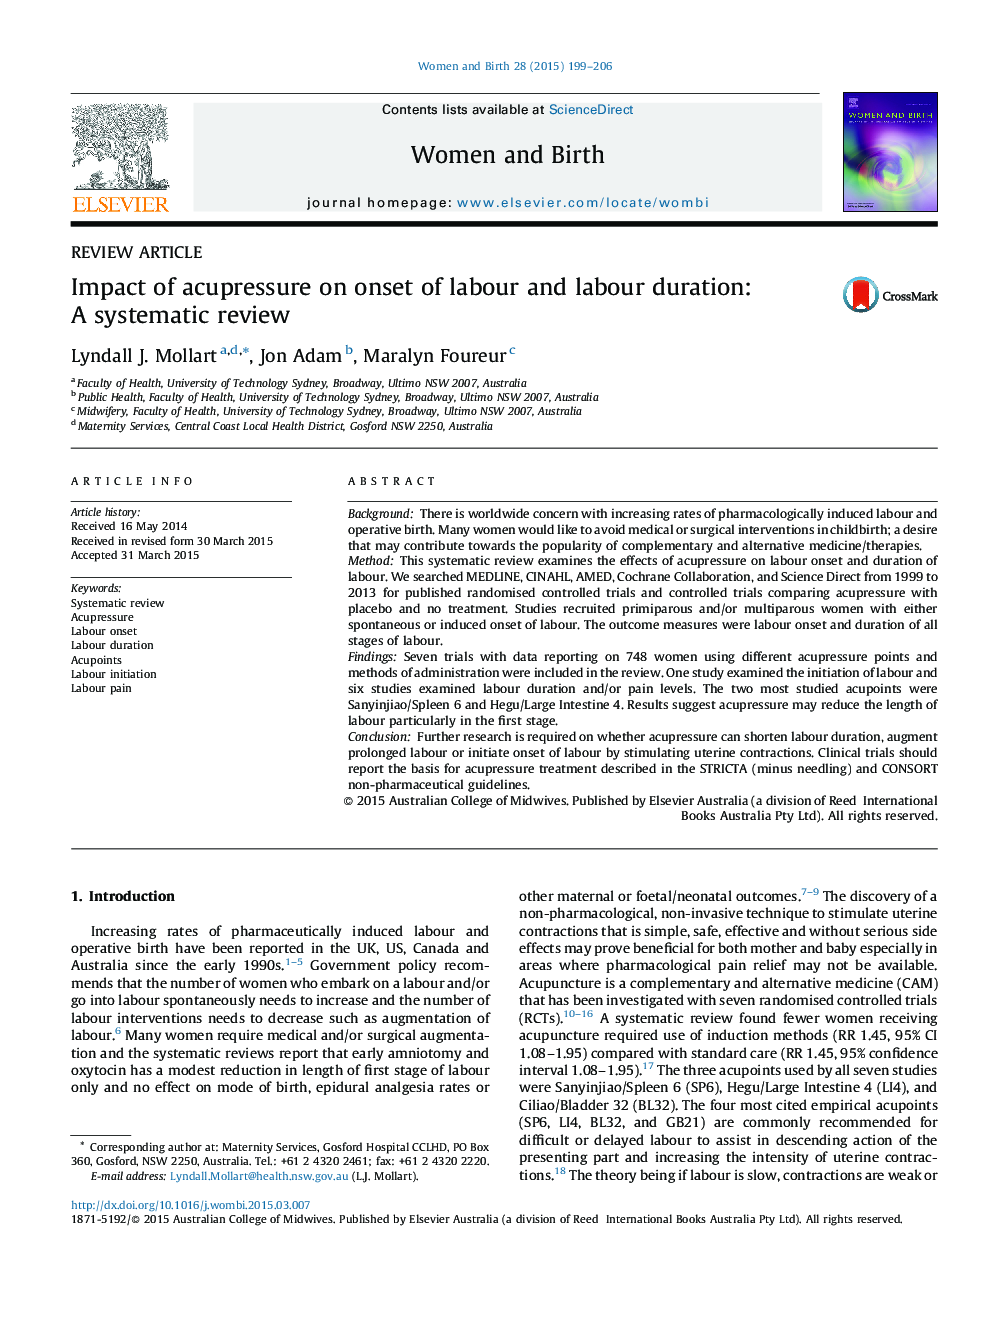 REVIEW ARTICLEImpact of acupressure on onset of labour and labour duration: A systematic review